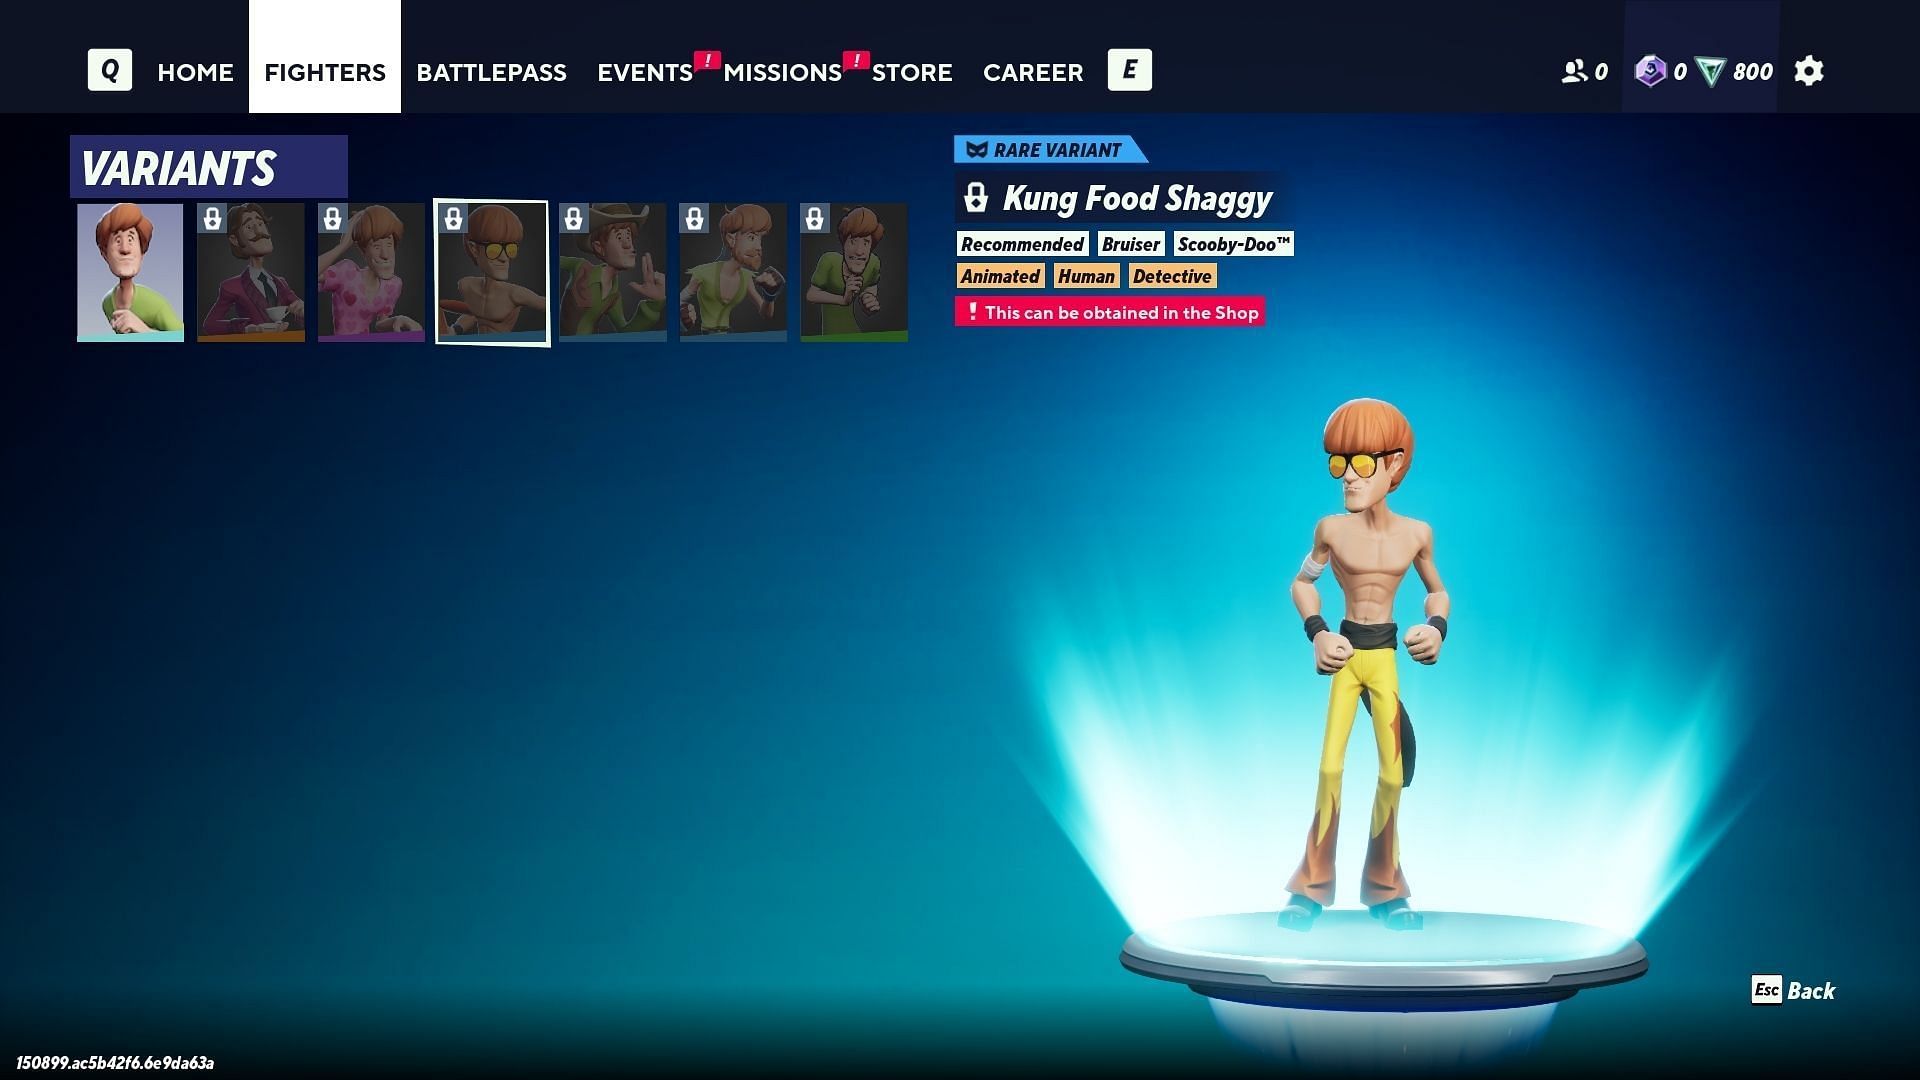 You can unlock additional skins for Shaggy by spending Glemium currency. (Image via Warner Bros. Games)